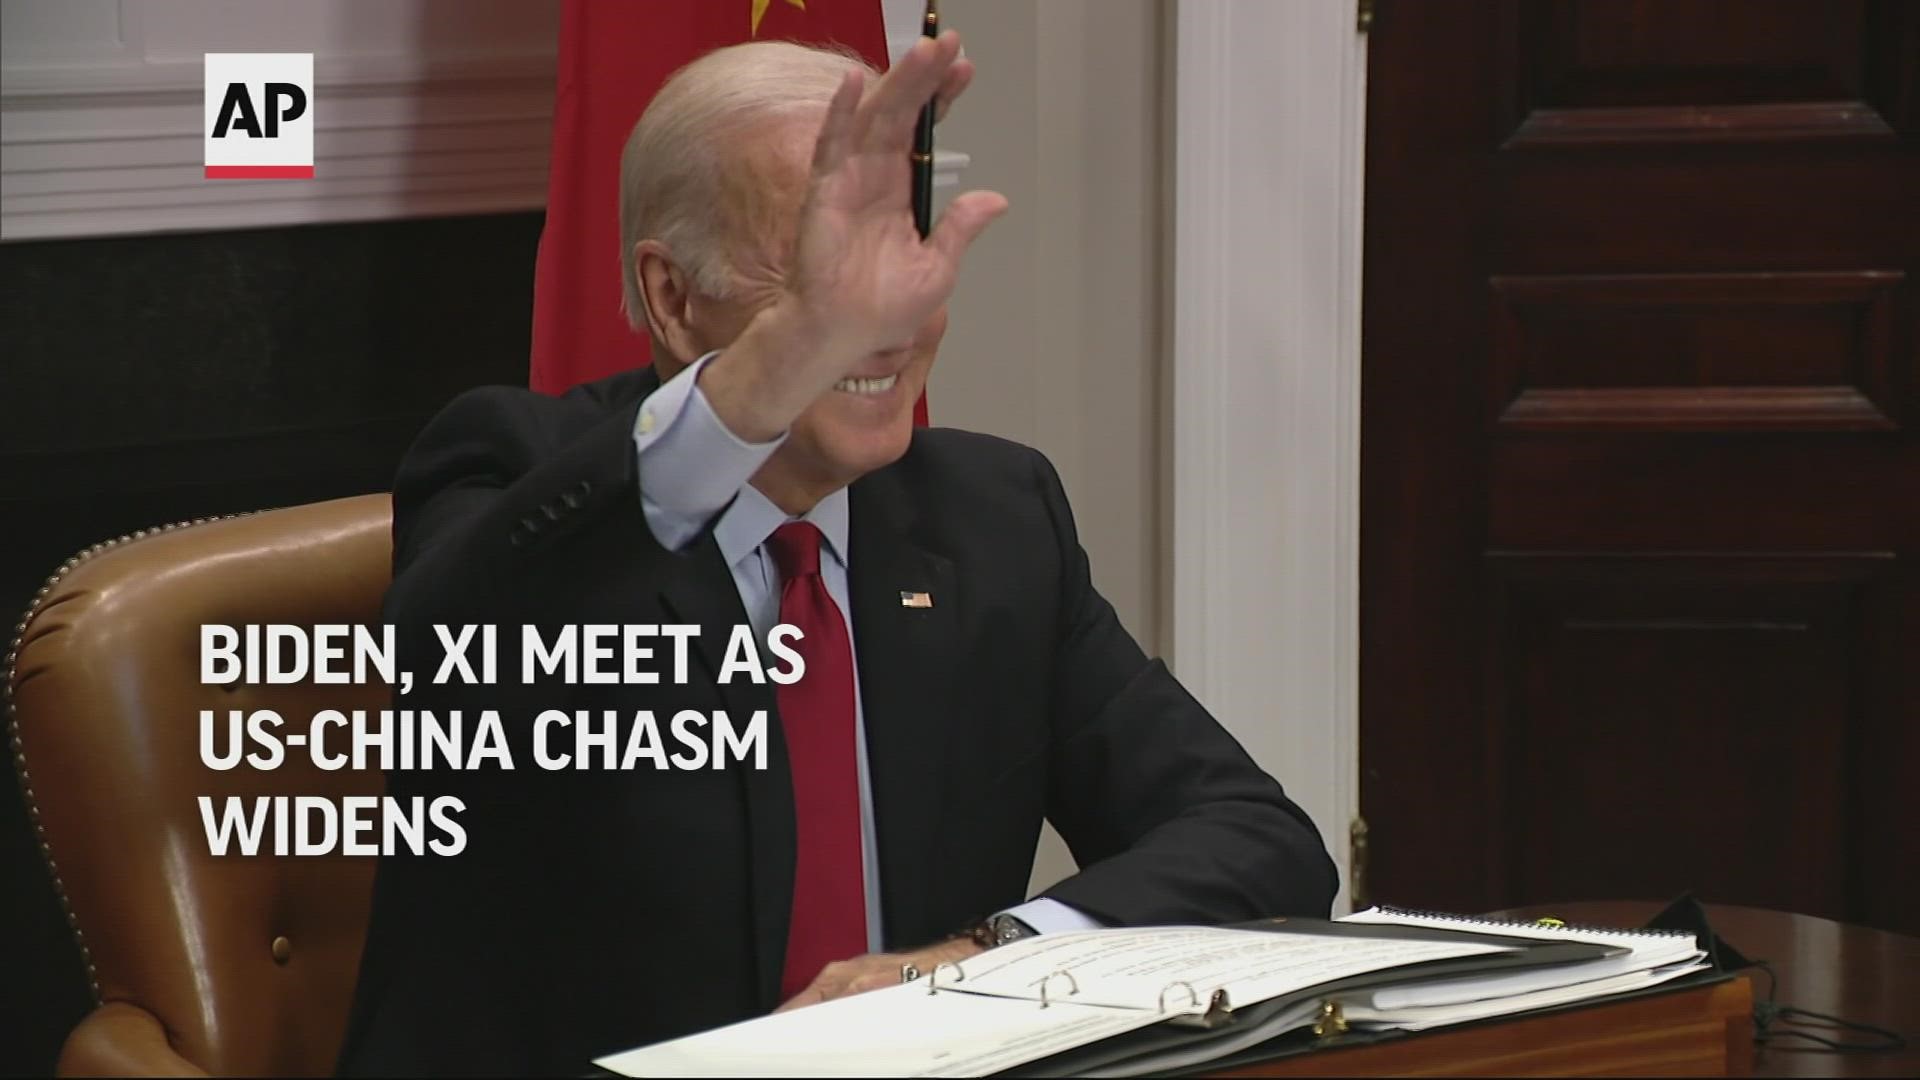 President Joe Biden opens a virtual meeting with China’s Xi Jinping saying his goal was to ensure competition “does not veer into conflict.”